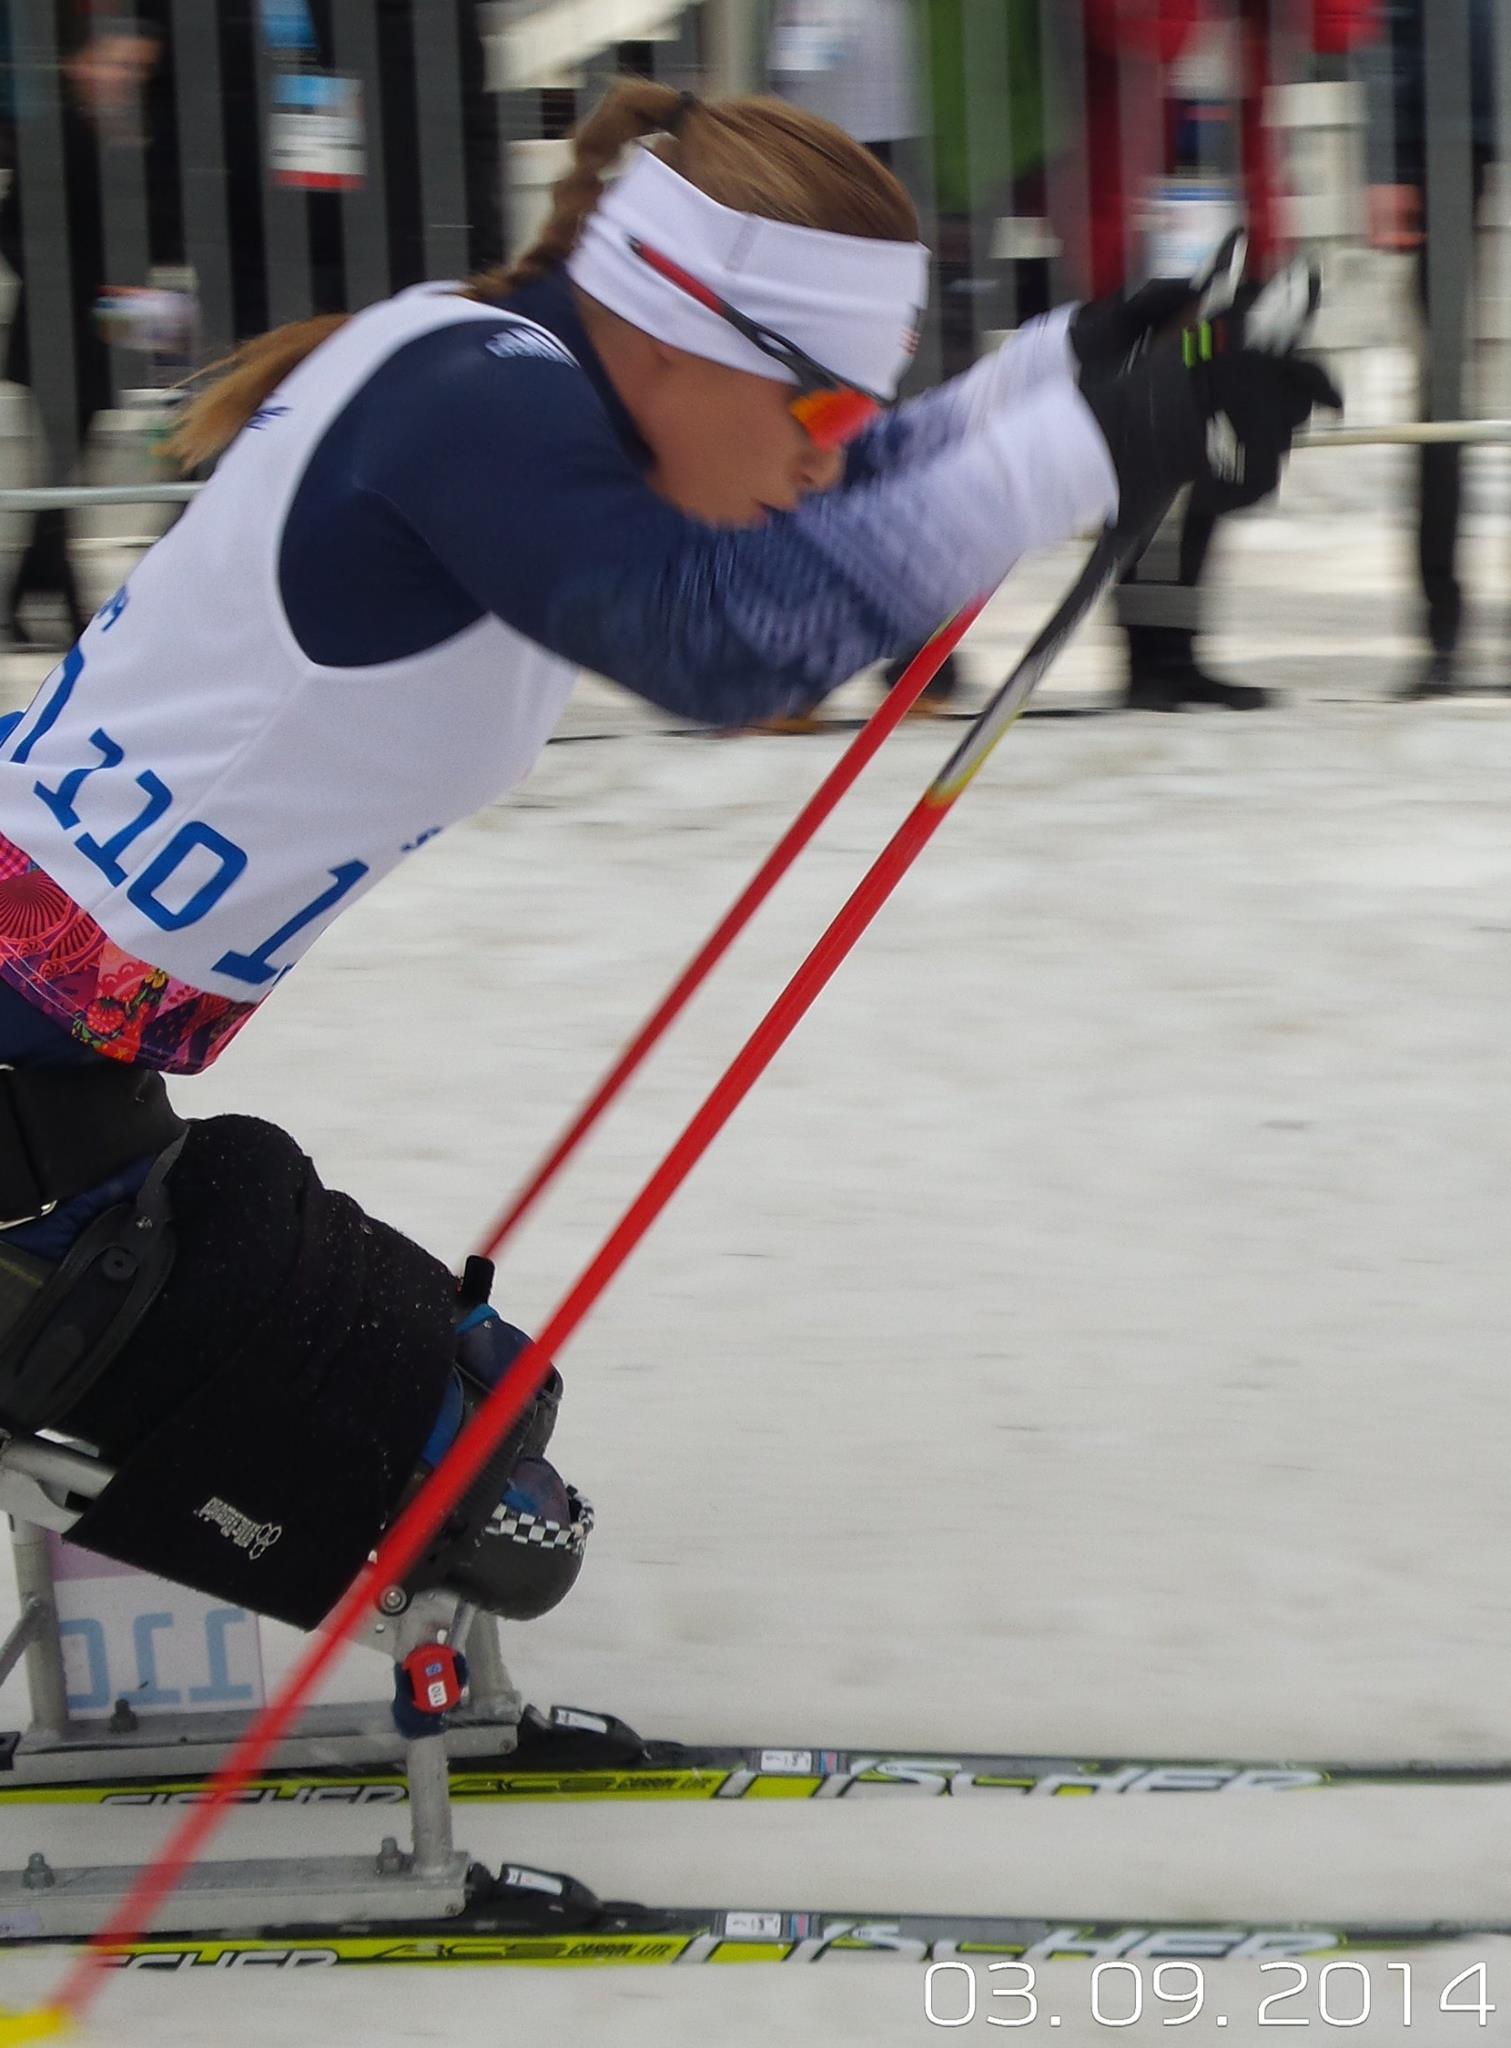 Masters Notches First-Ever U.S. Cross-Country Silver at Paralympics, Teammates in the Hunt